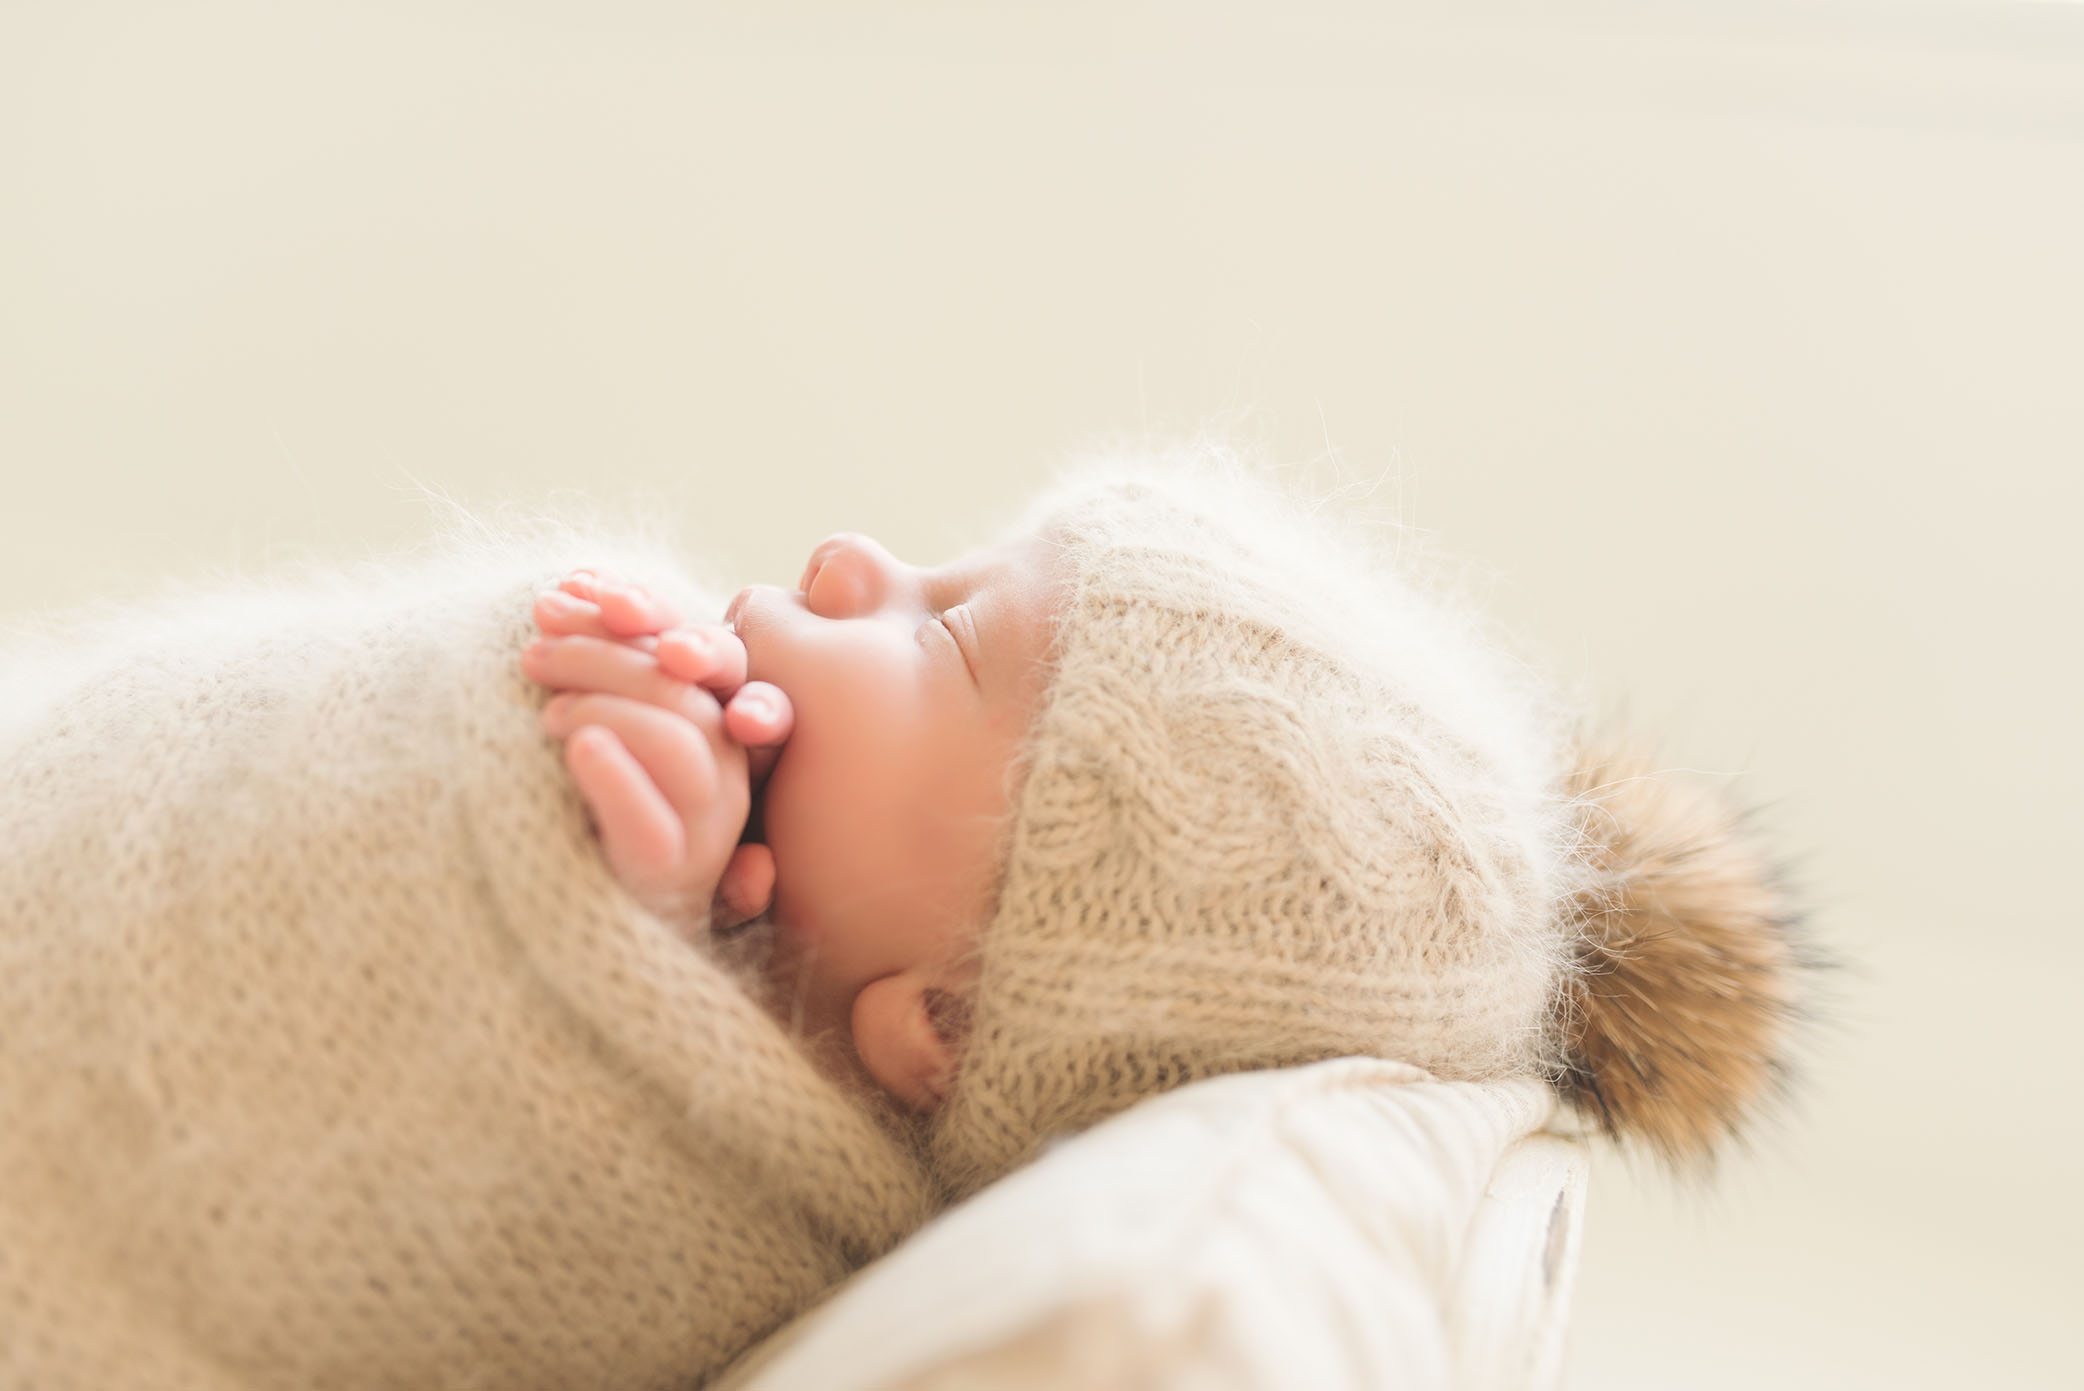 Profile of baby wearing beige fuzzy bonnet captured by Sweet Beginnings Photography by Stephanie